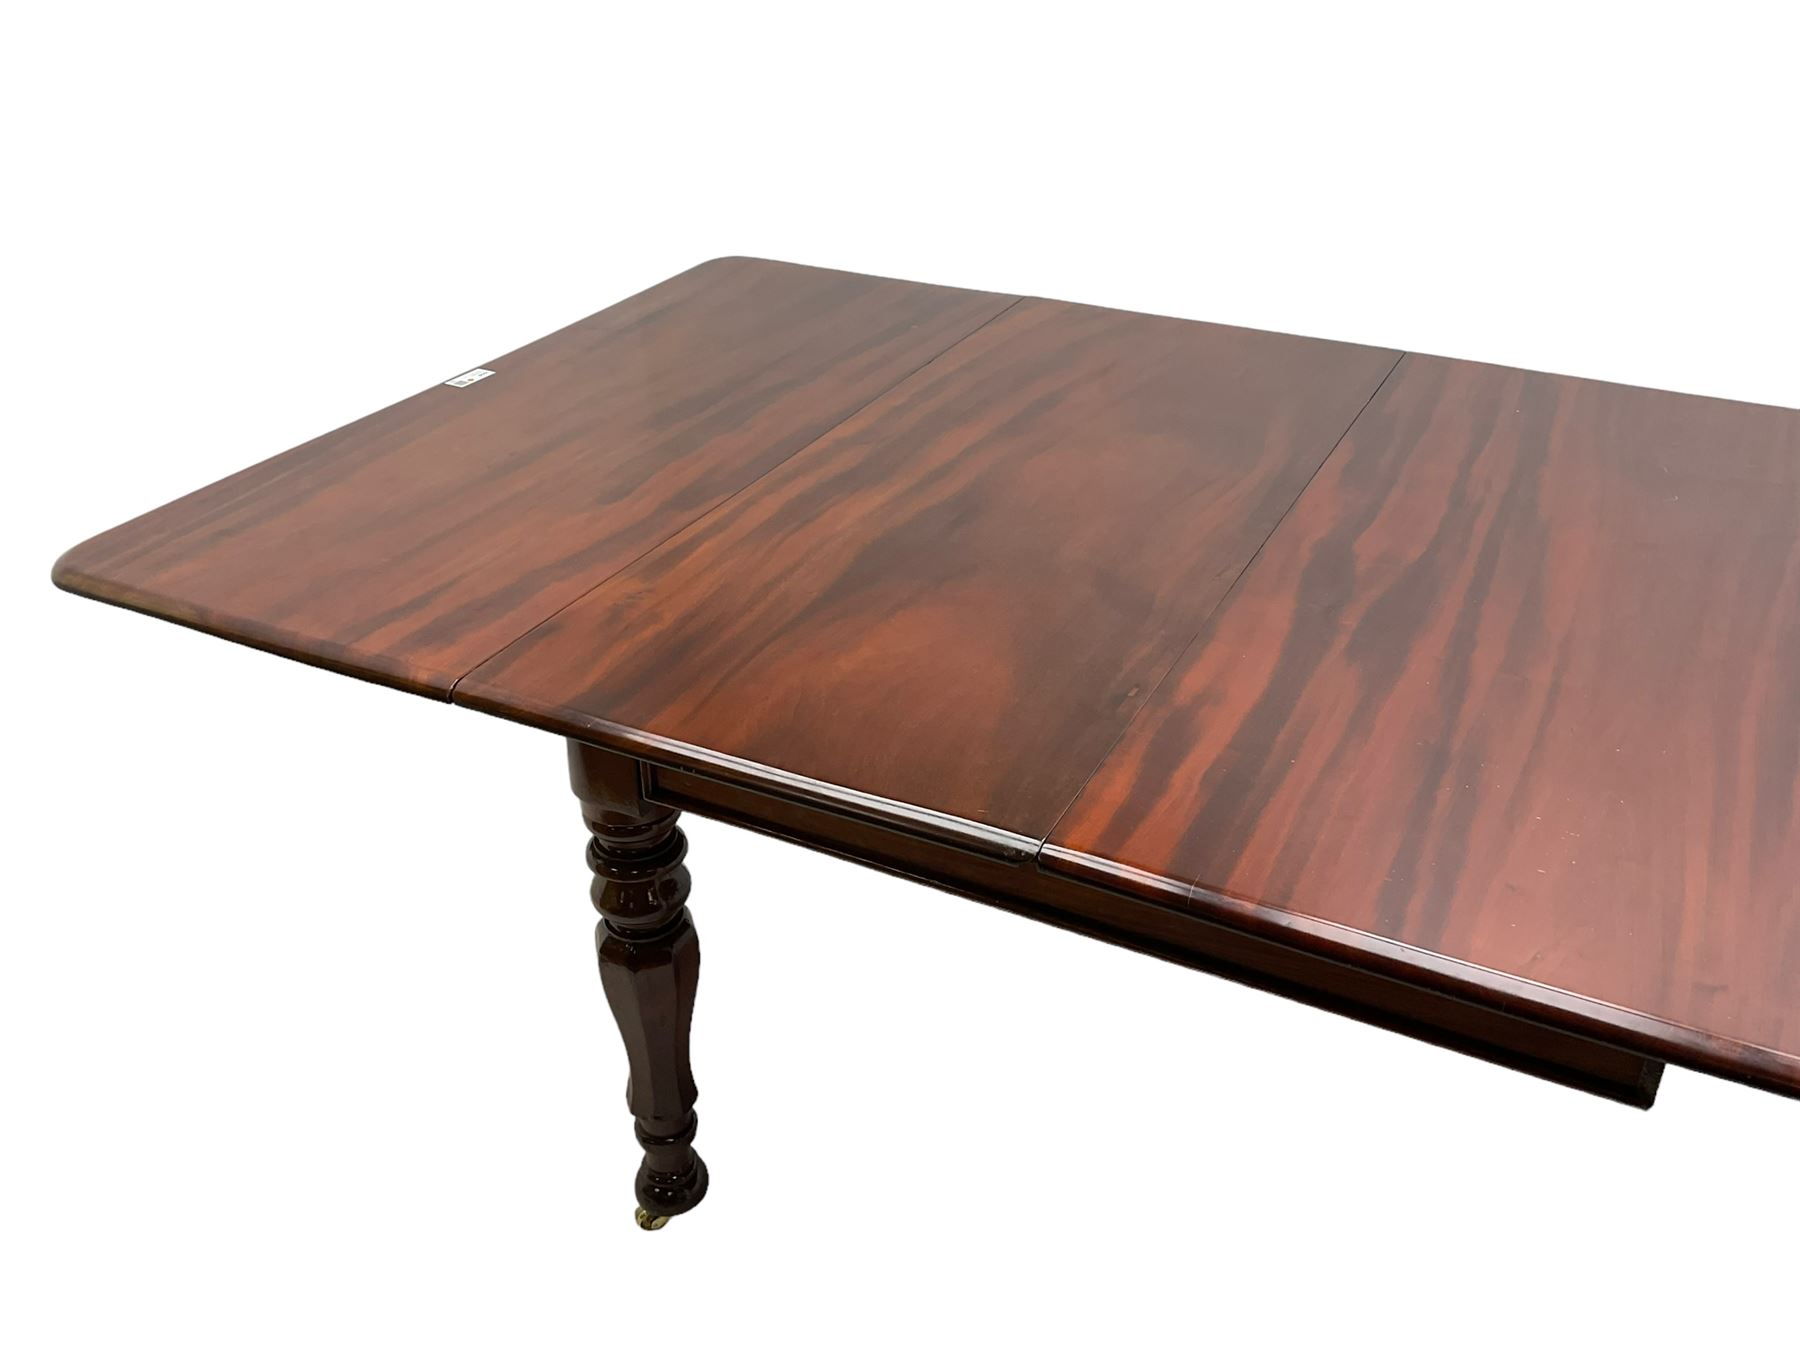 19th century mahogany extending dining table with three additional leaves - Image 5 of 15